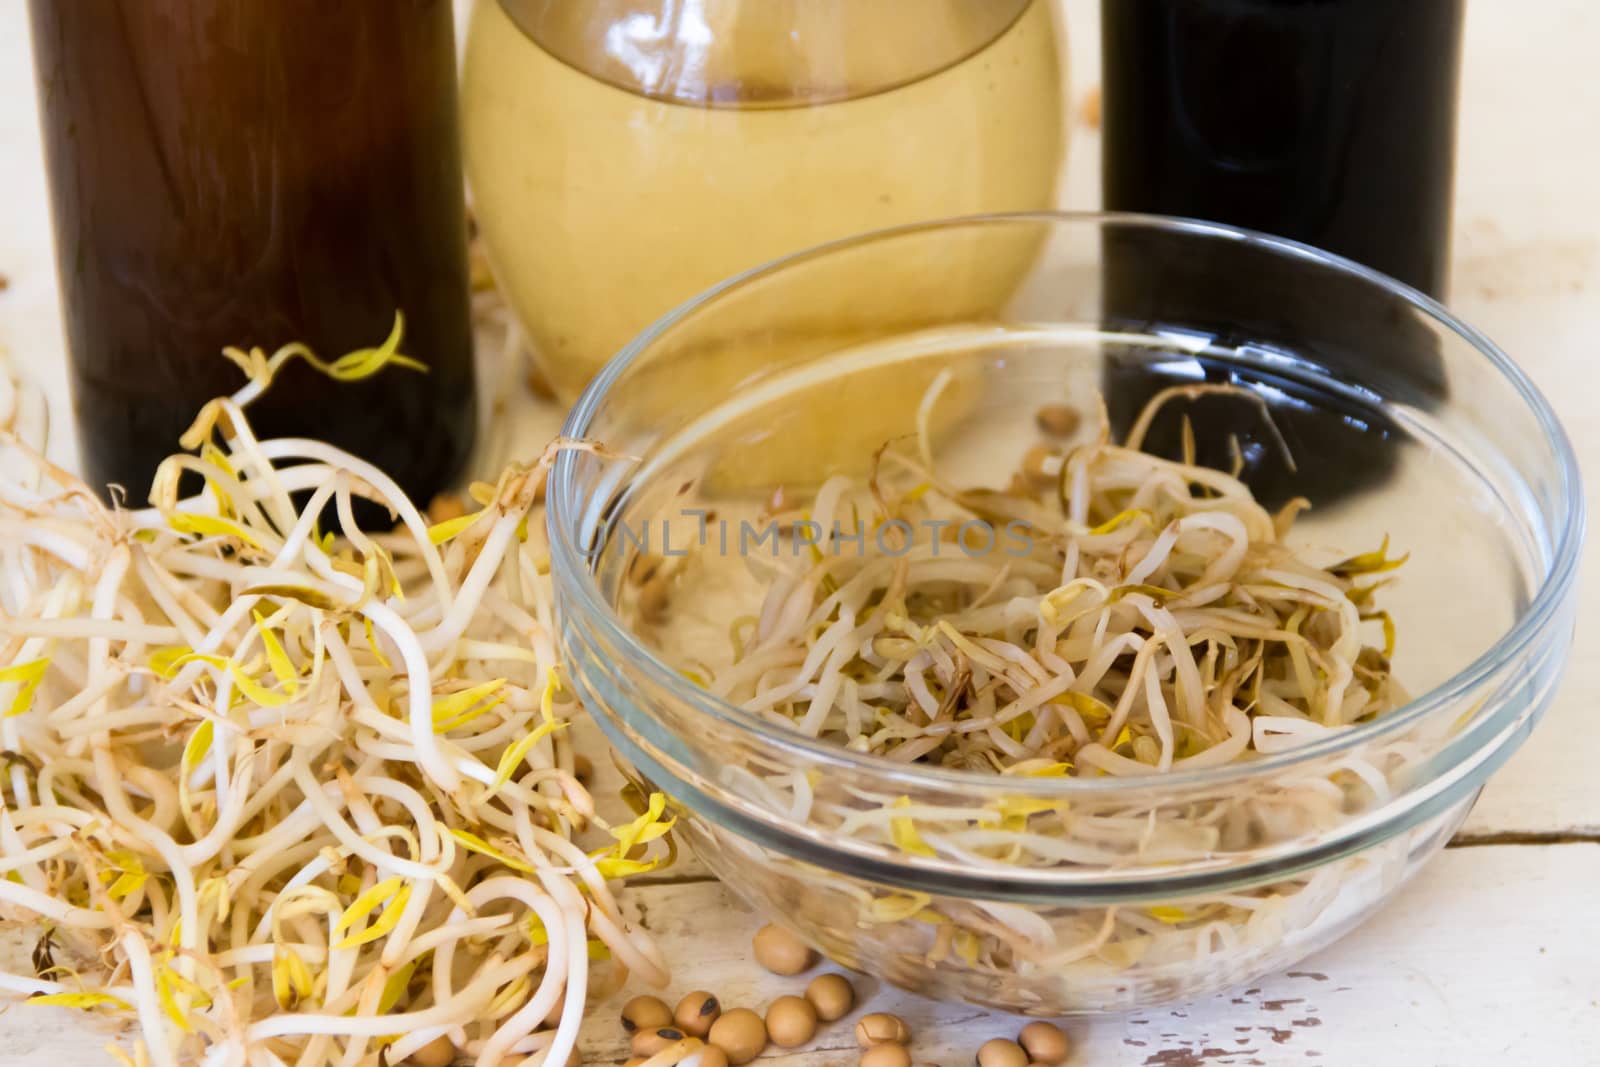 preparation of pickled soybeans in vinegar and with sauce